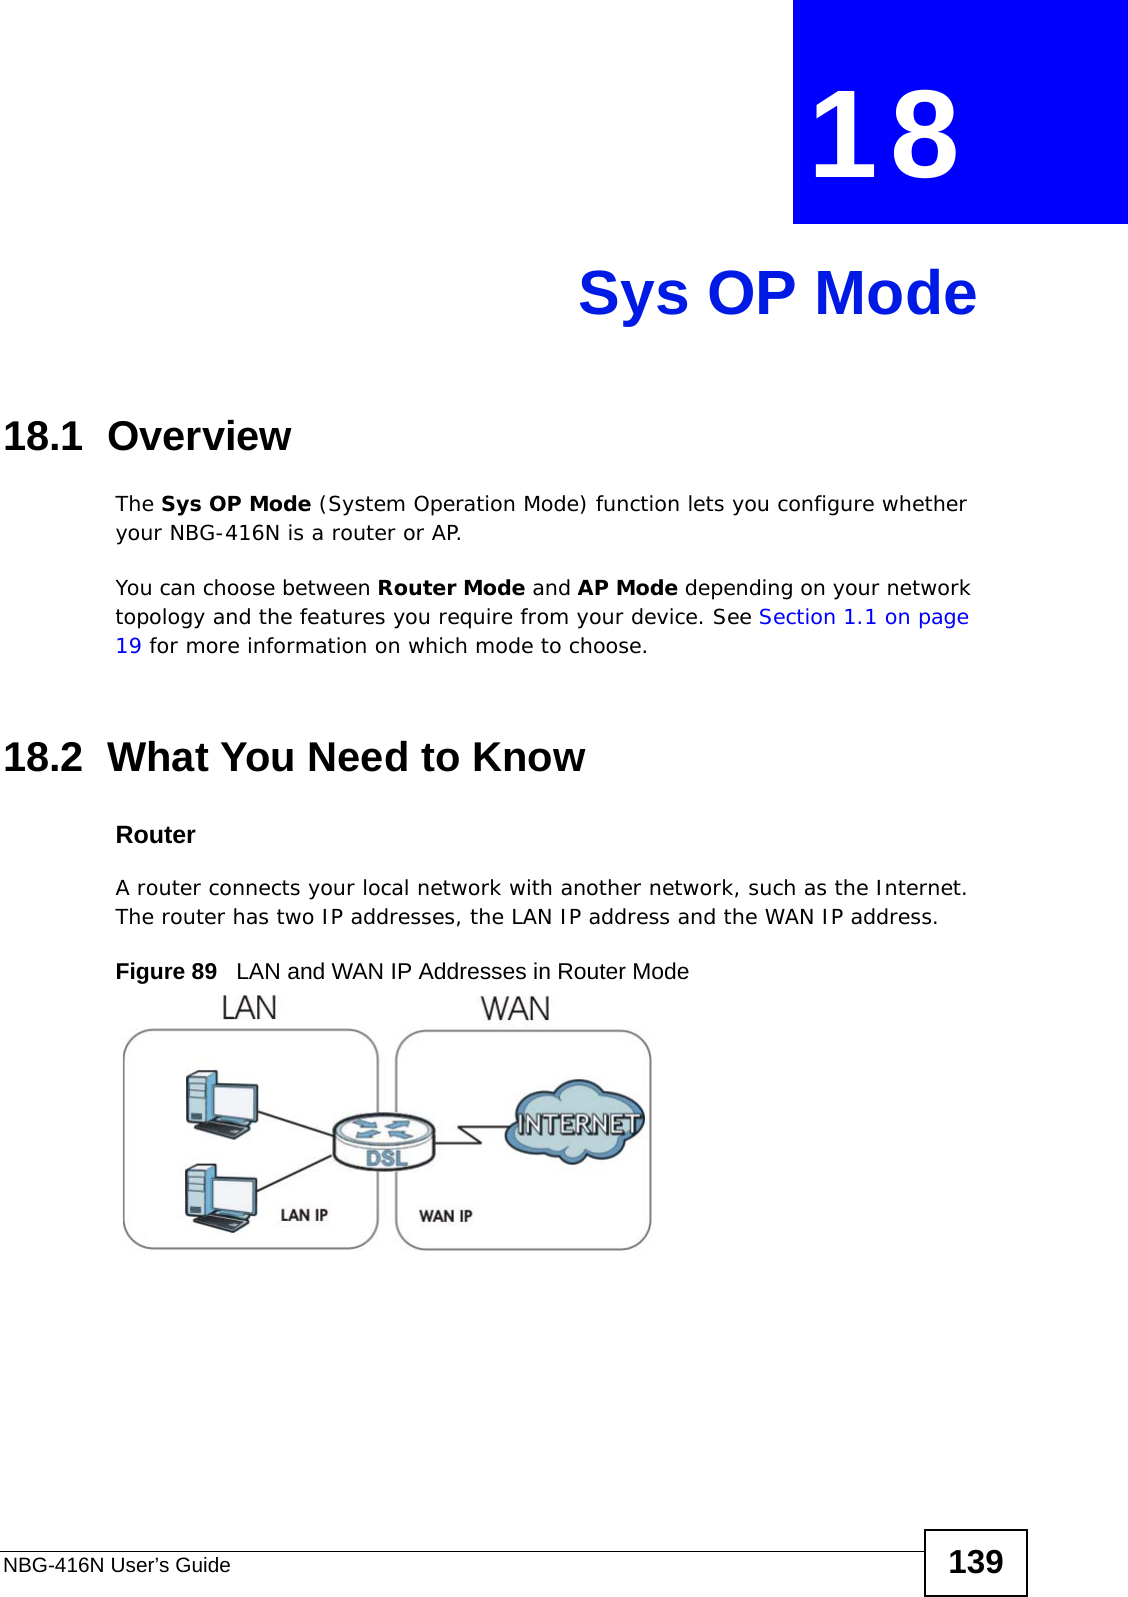 NBG-416N User’s Guide 139CHAPTER  18 Sys OP Mode18.1  OverviewThe Sys OP Mode (System Operation Mode) function lets you configure whether your NBG-416N is a router or AP. You can choose between Router Mode and AP Mode depending on your network topology and the features you require from your device. See Section 1.1 on page 19 for more information on which mode to choose.18.2  What You Need to KnowRouterA router connects your local network with another network, such as the Internet. The router has two IP addresses, the LAN IP address and the WAN IP address.Figure 89   LAN and WAN IP Addresses in Router Mode